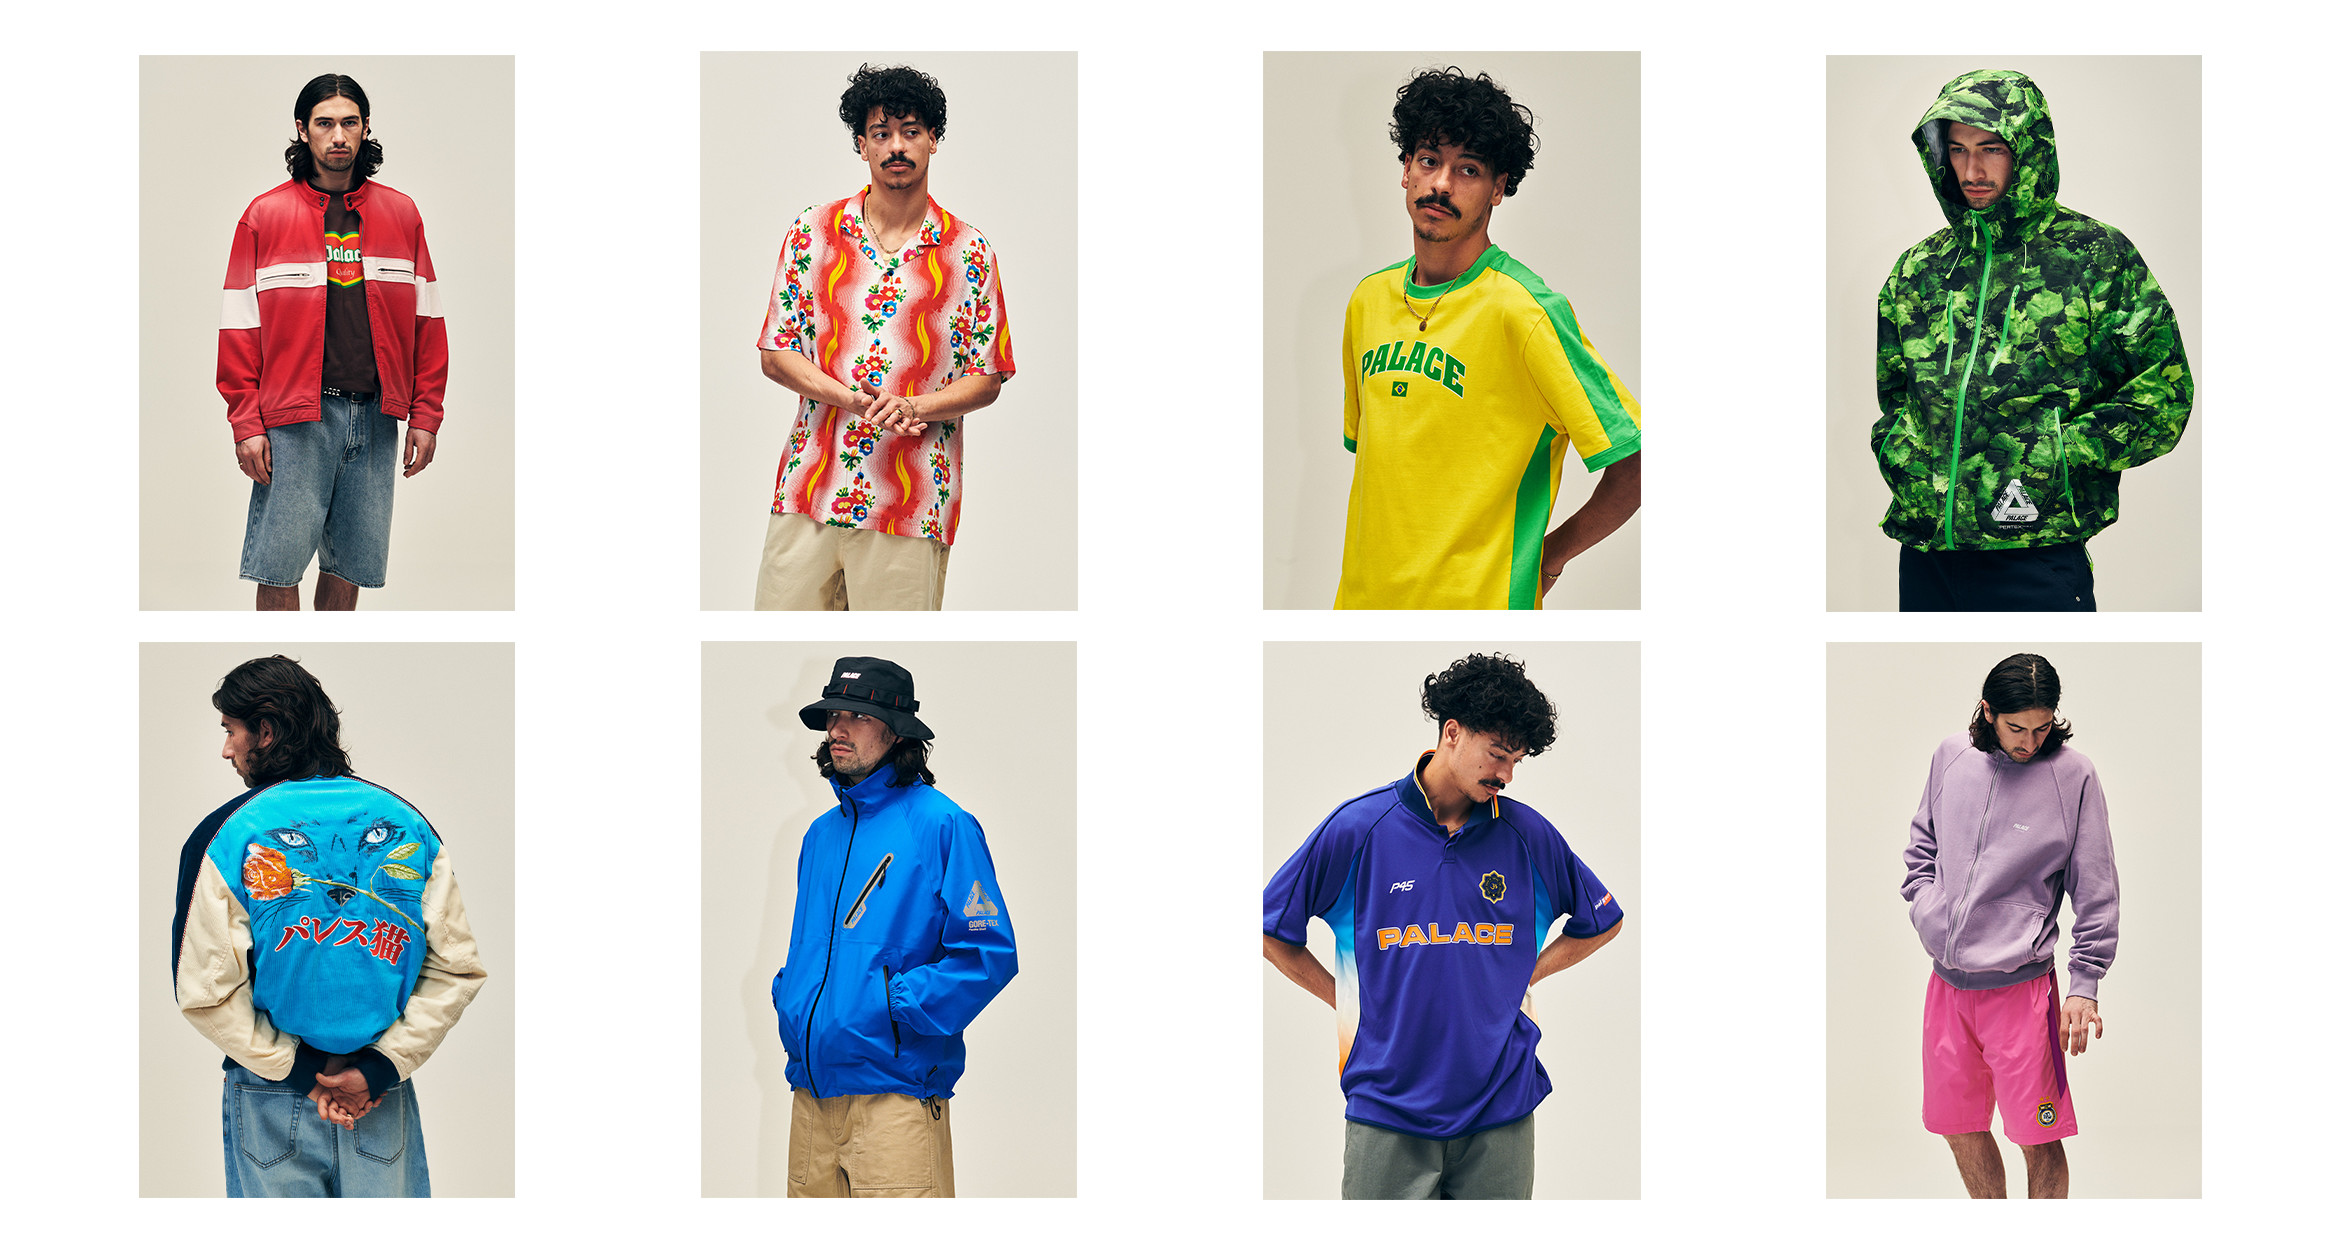 Palace Show Off Football Tops, Embroidered Denim & Leafy Waterproofs in Summer Lookbook